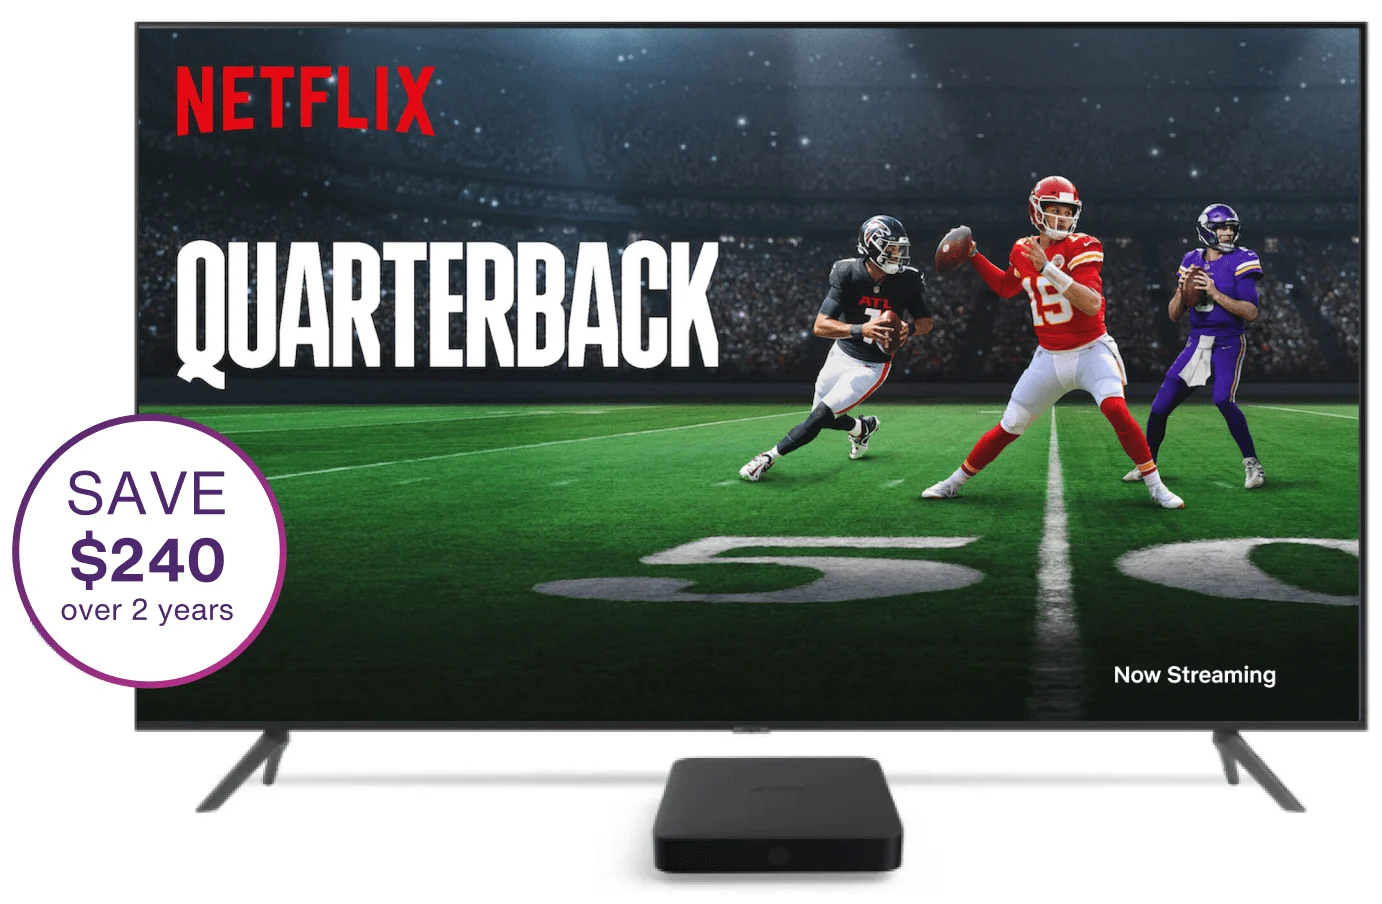 A text box reads "Save $240 over 2 years" next to a TV displaying a visual for Quarterback, a Netflix original show.